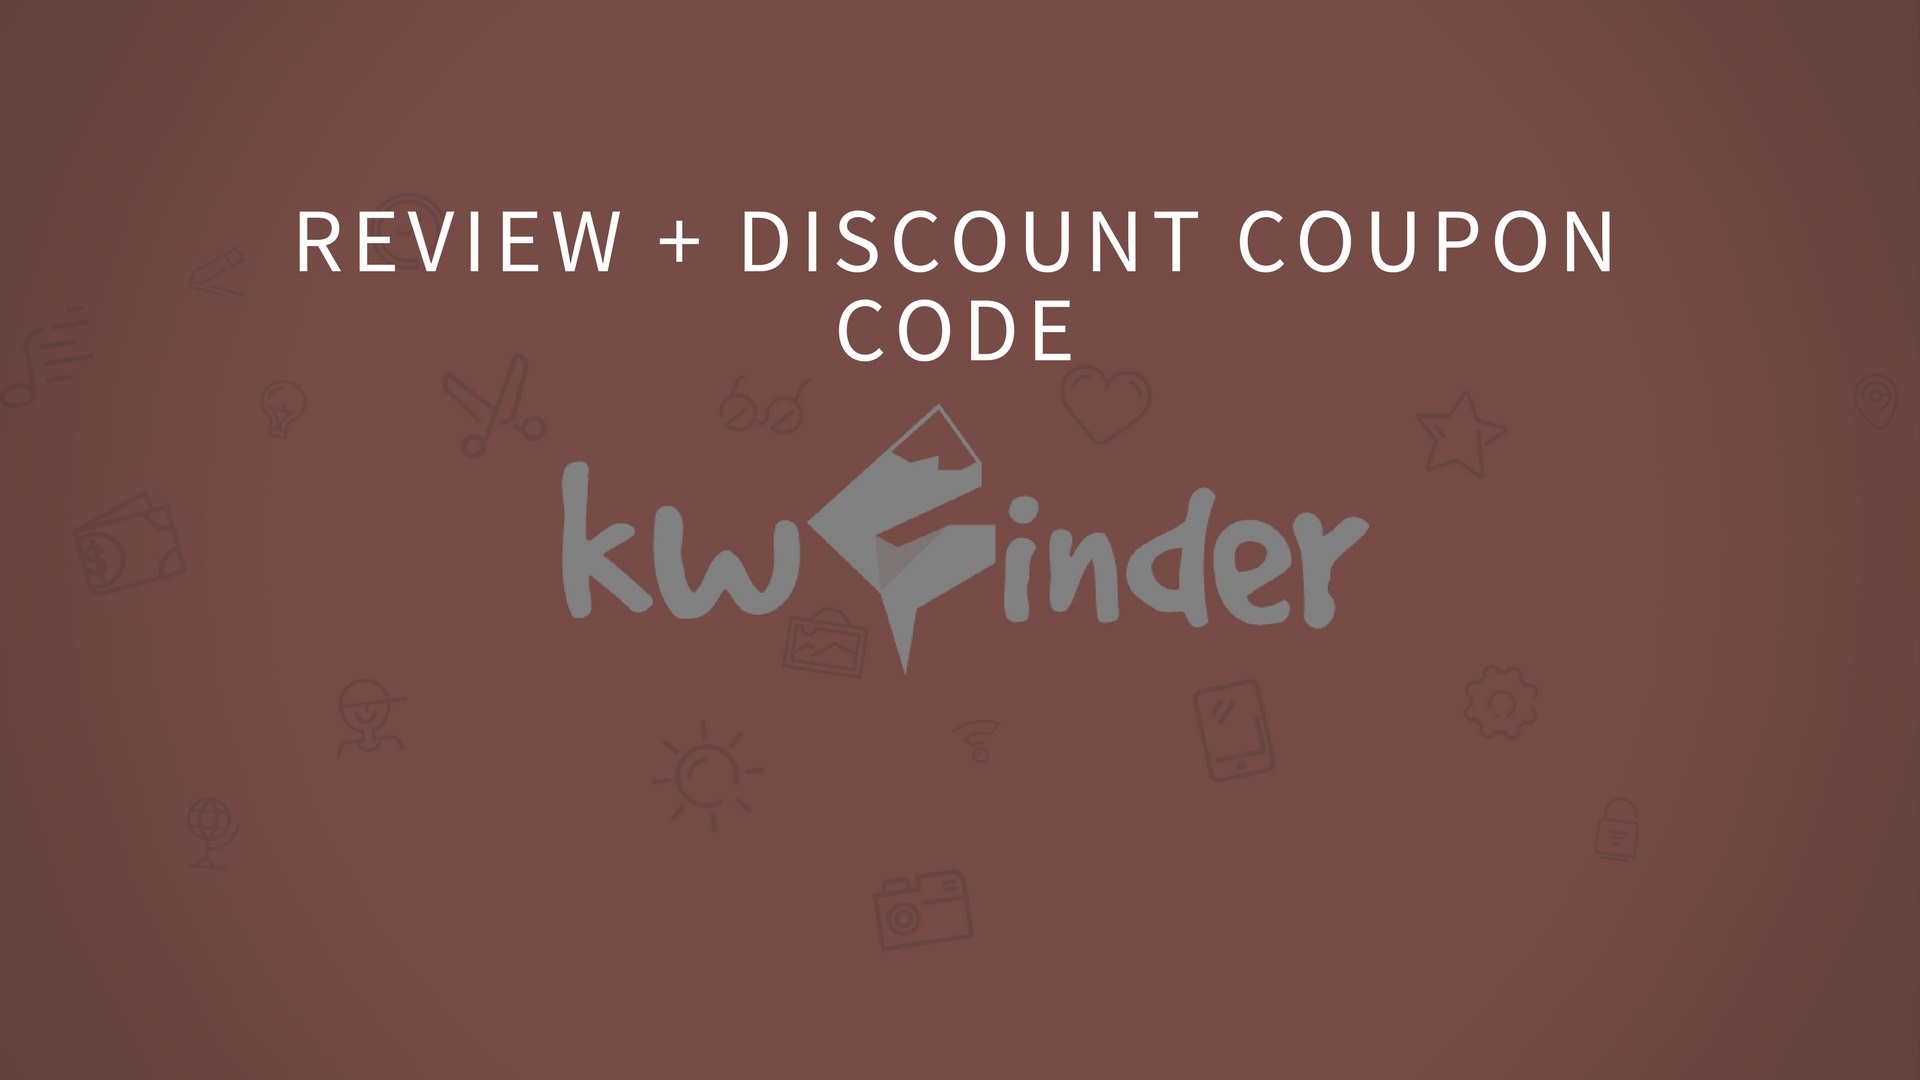 Kwfinder Review and Discount Coupon Code